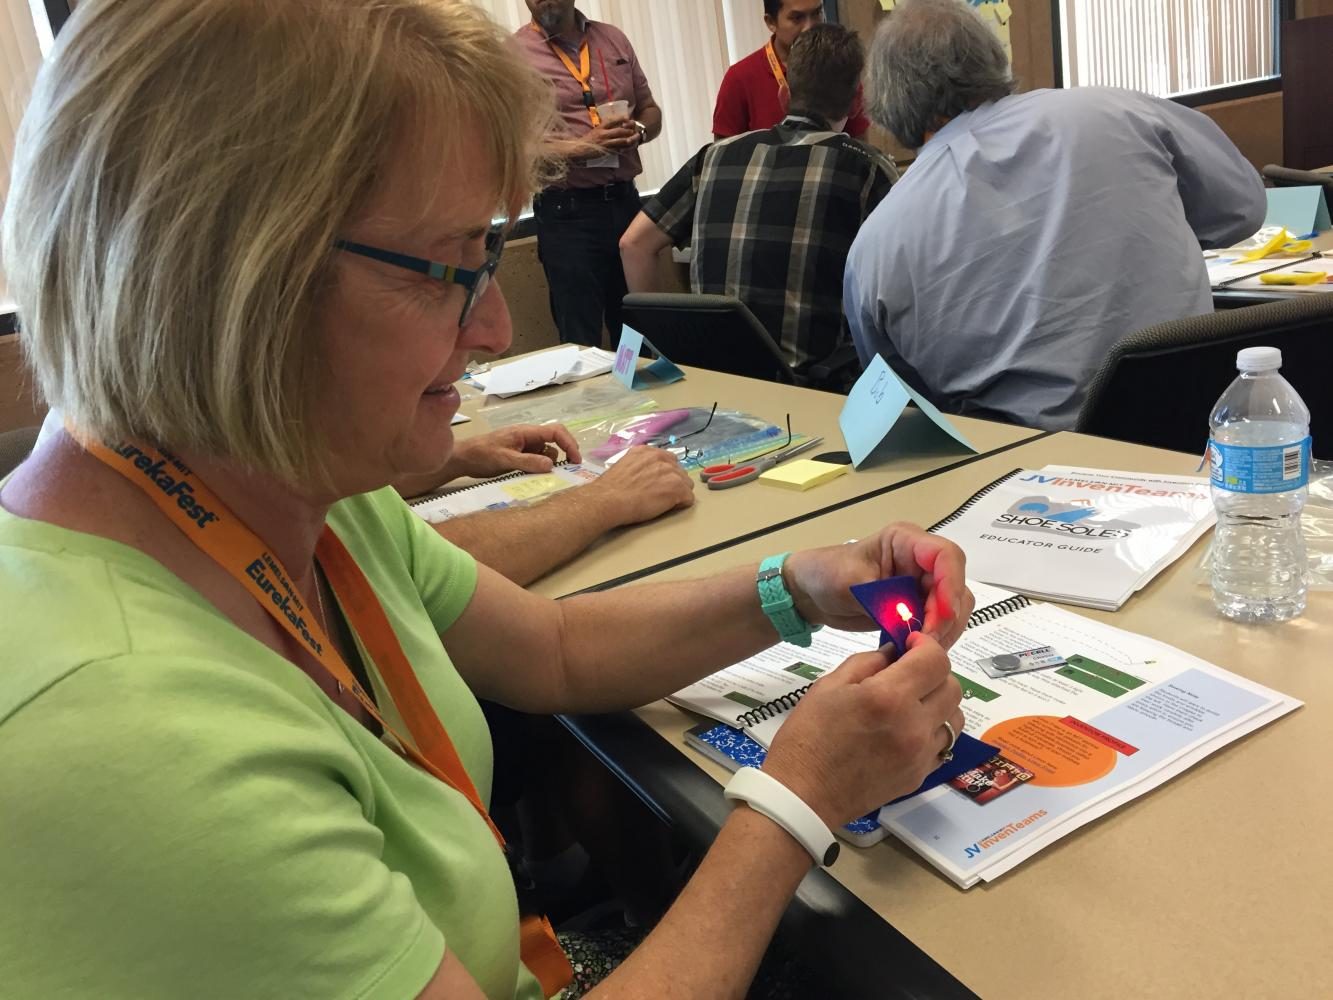 Mrs. Haddock investigates circuits based on ardunios at her summer conference.